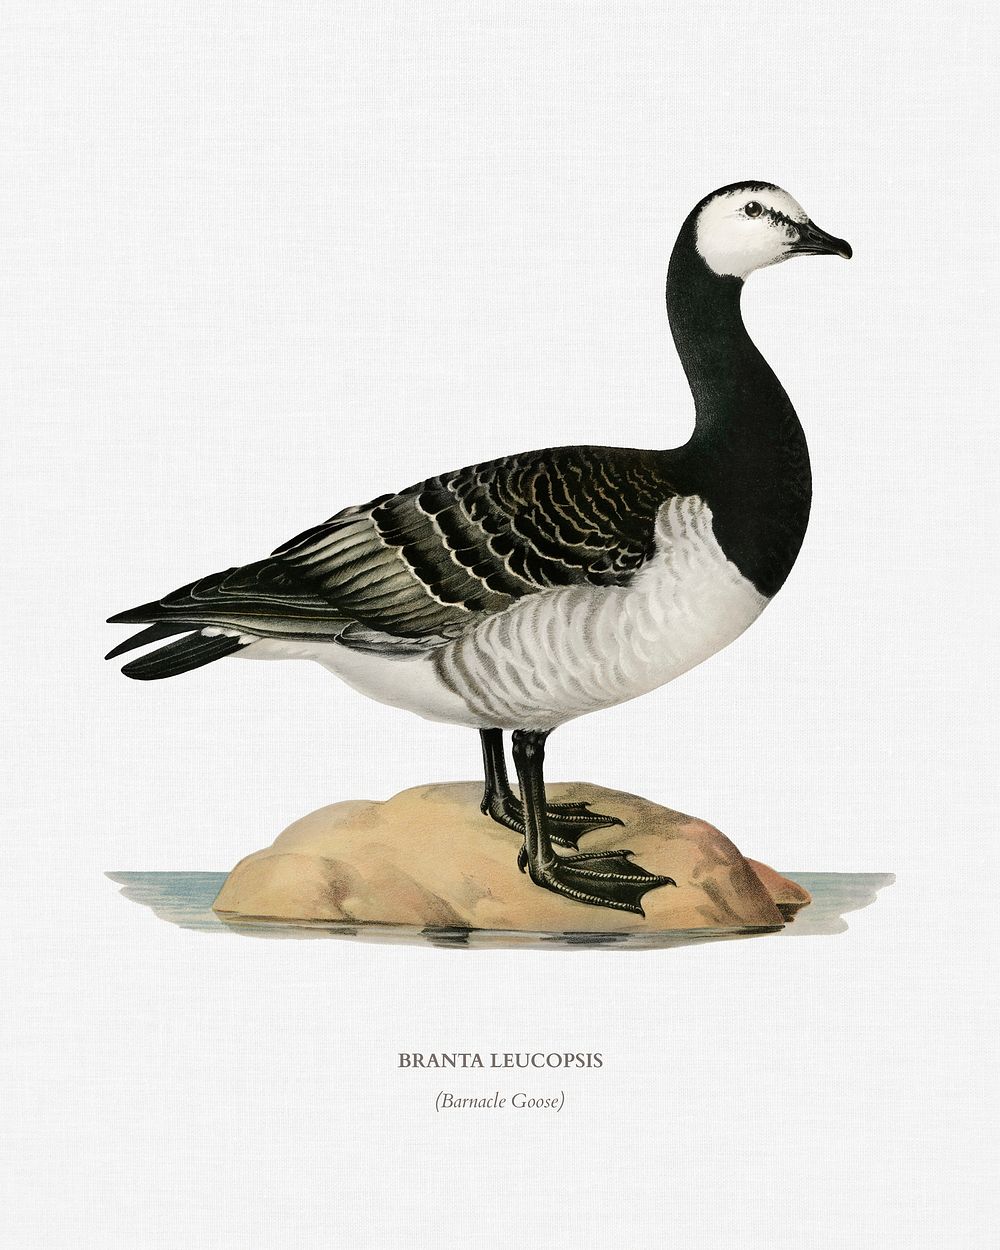 Barnacle Goose (BRANTA LEUCOPSIS) illustrated by the von Wright brothers. Digitally enhanced from our own 1929 folio version…